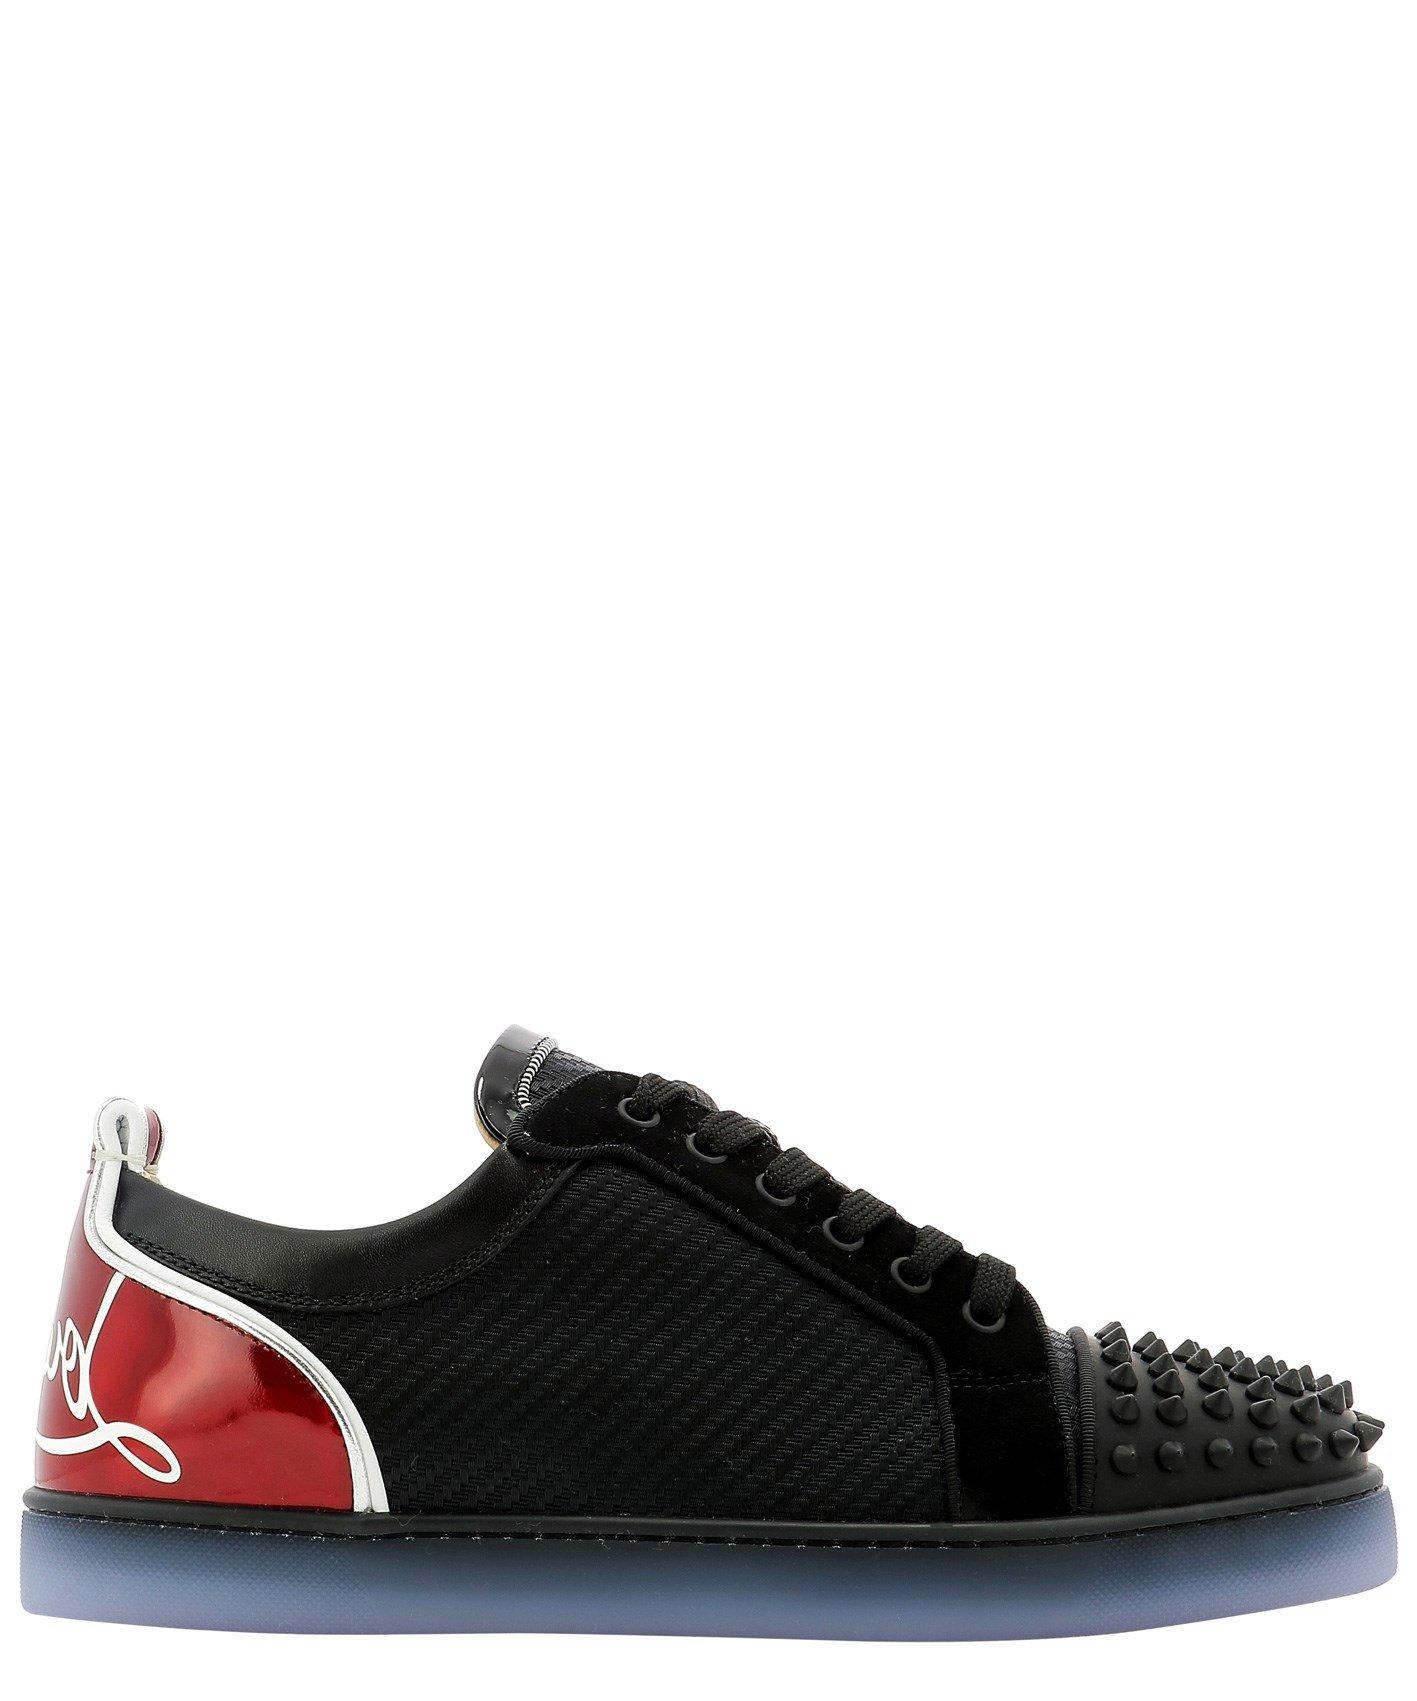 Louis Junior Spikes - Sneakers - Calf leather and spikes - Black - Christian  Louboutin United States